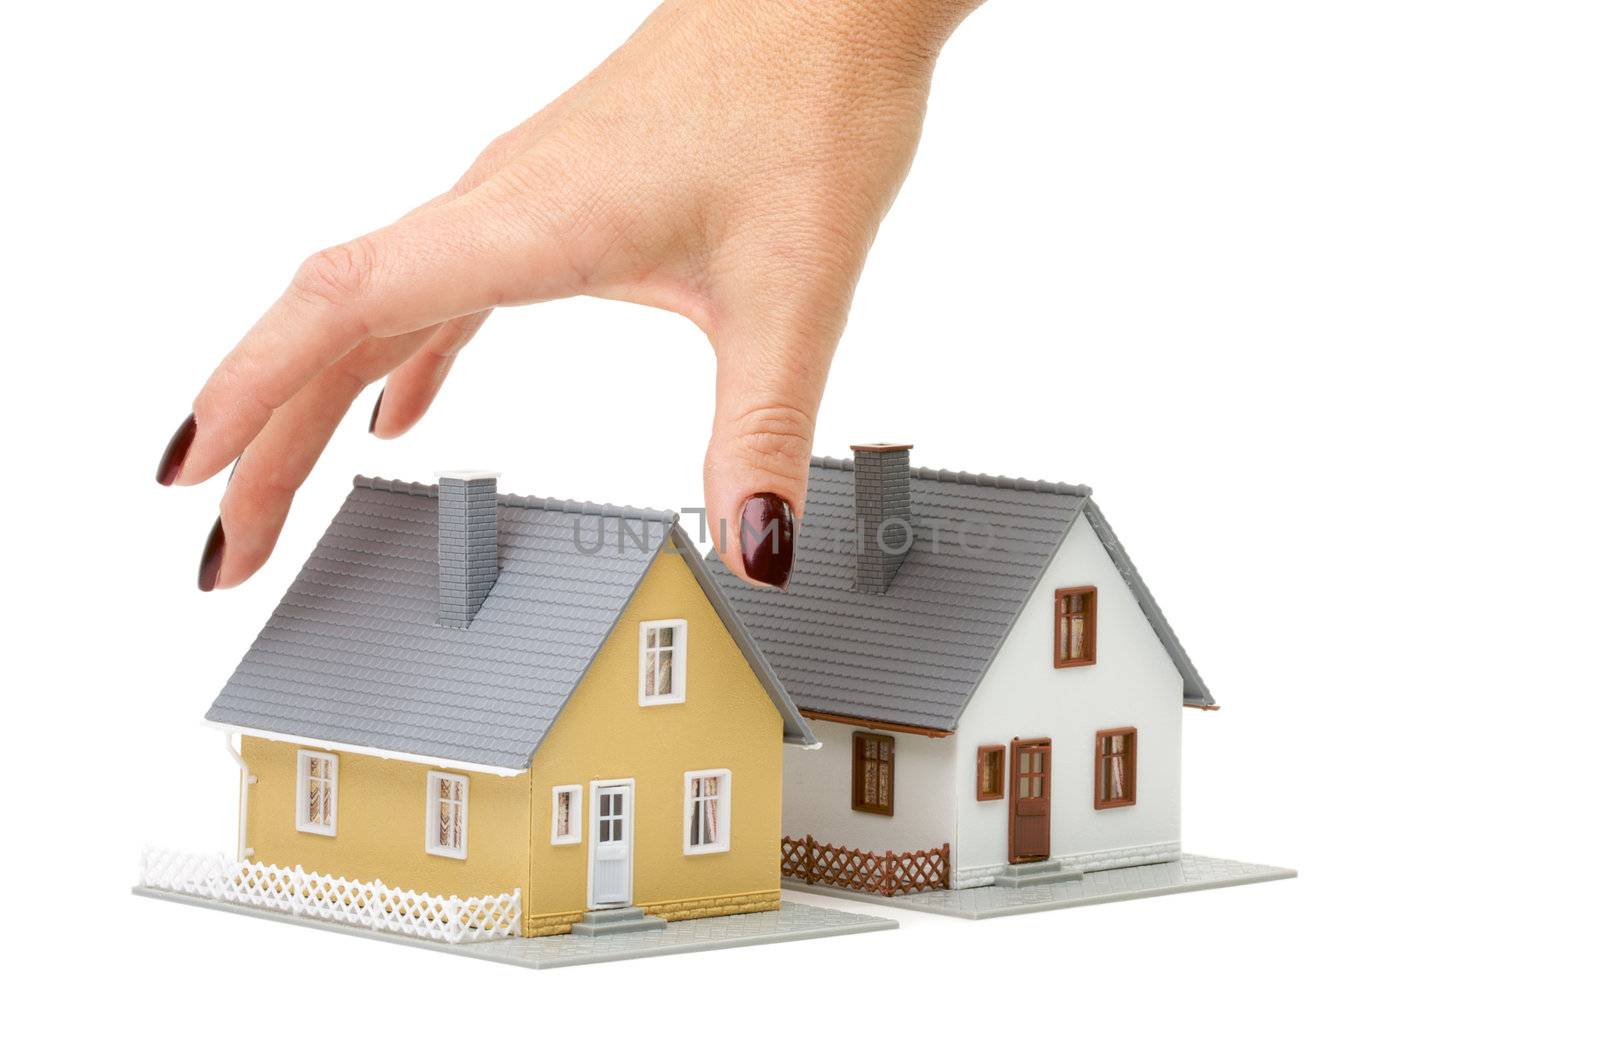 Female hand reaching for house isolated on a white background.